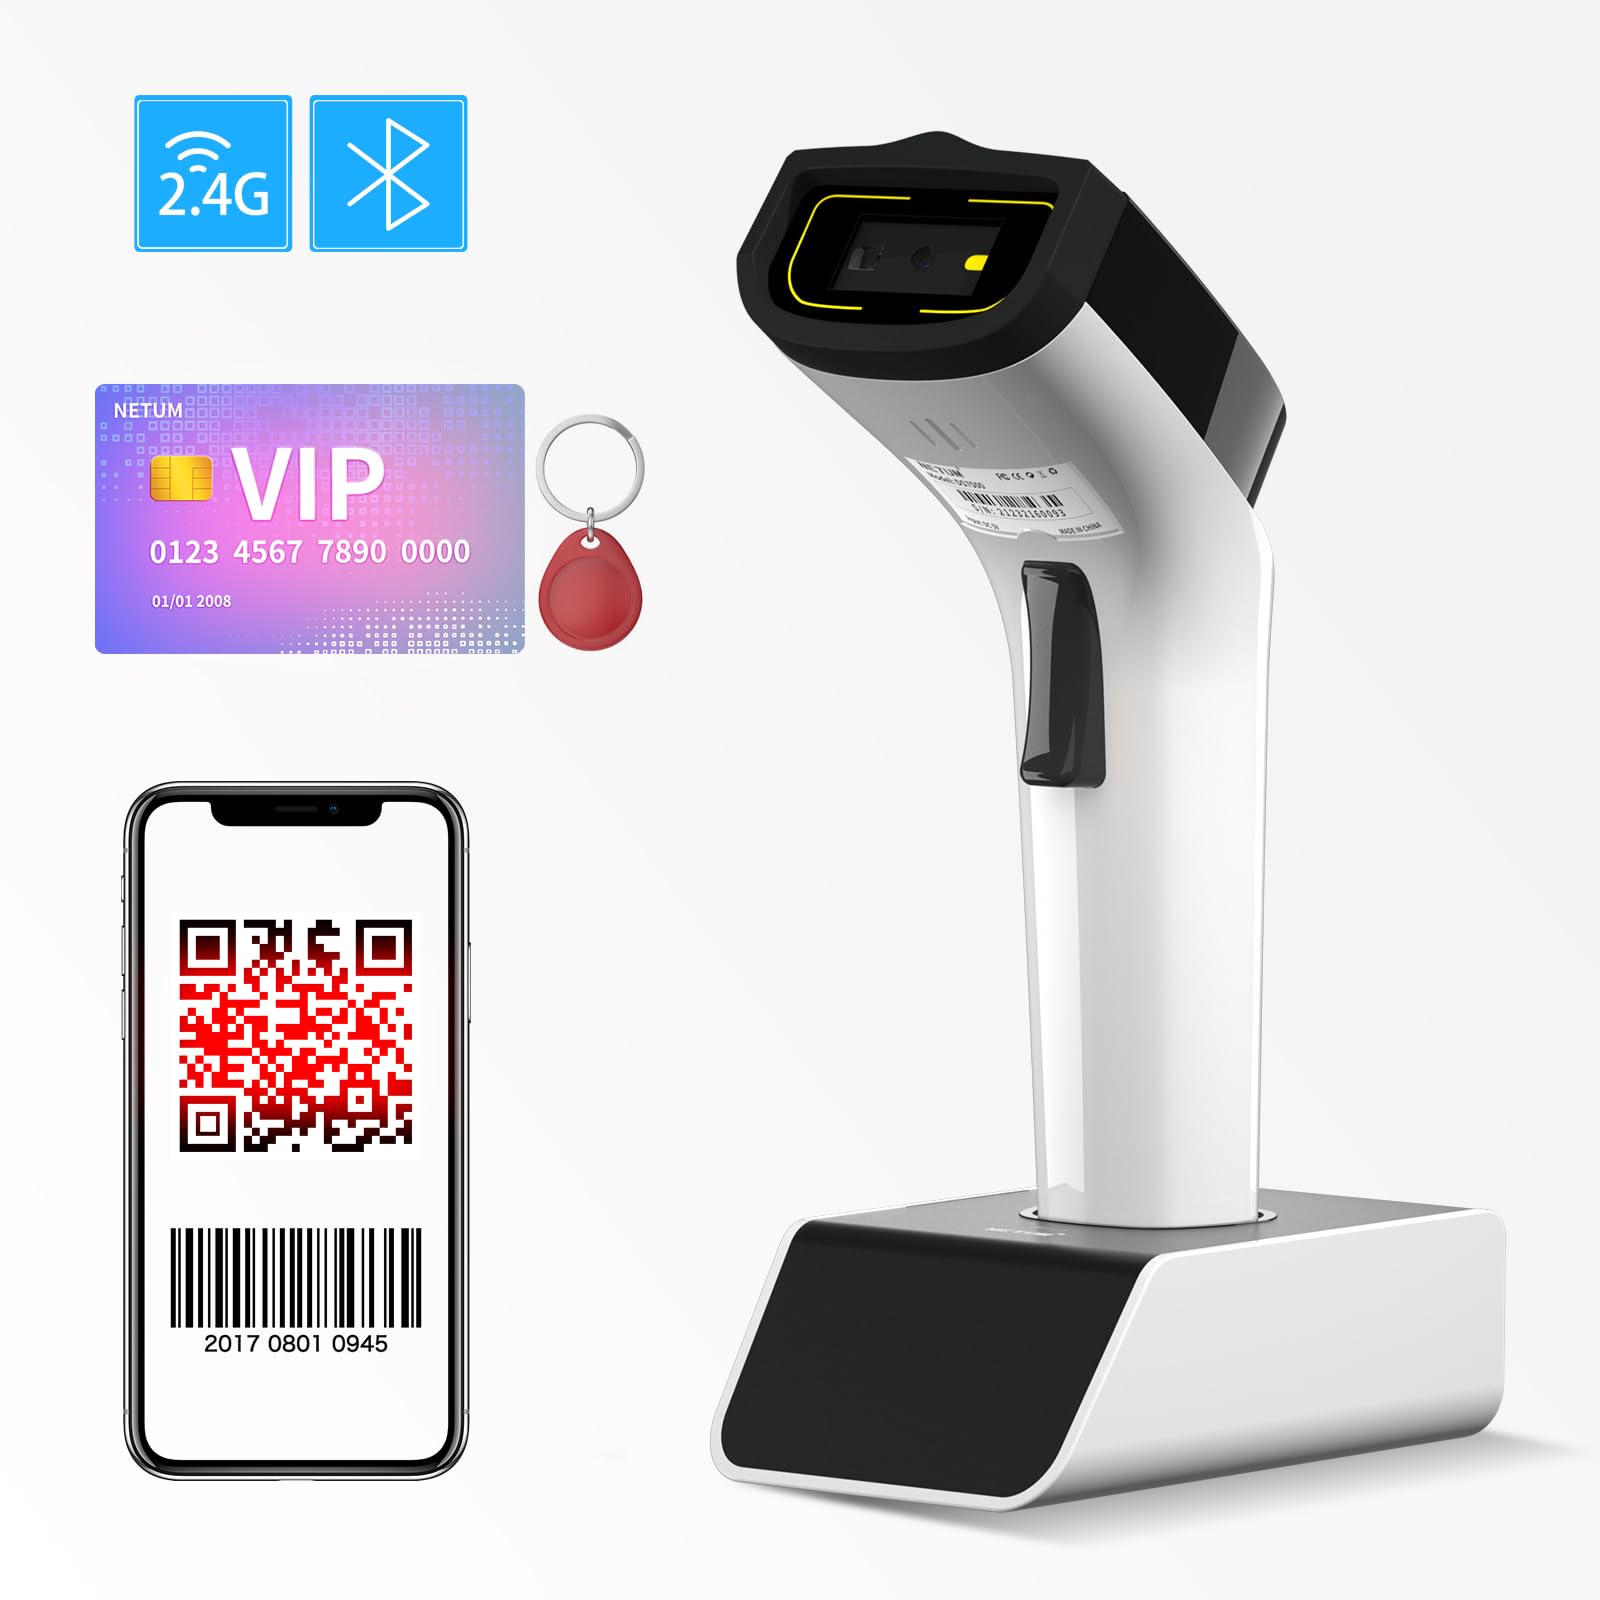 NETUM Hands Free Automatic Sensing Bar Code Reader 1D 2D QR pdf417 Scan Gun Works with MAC OS, Windows, iOS, Android - DS8100